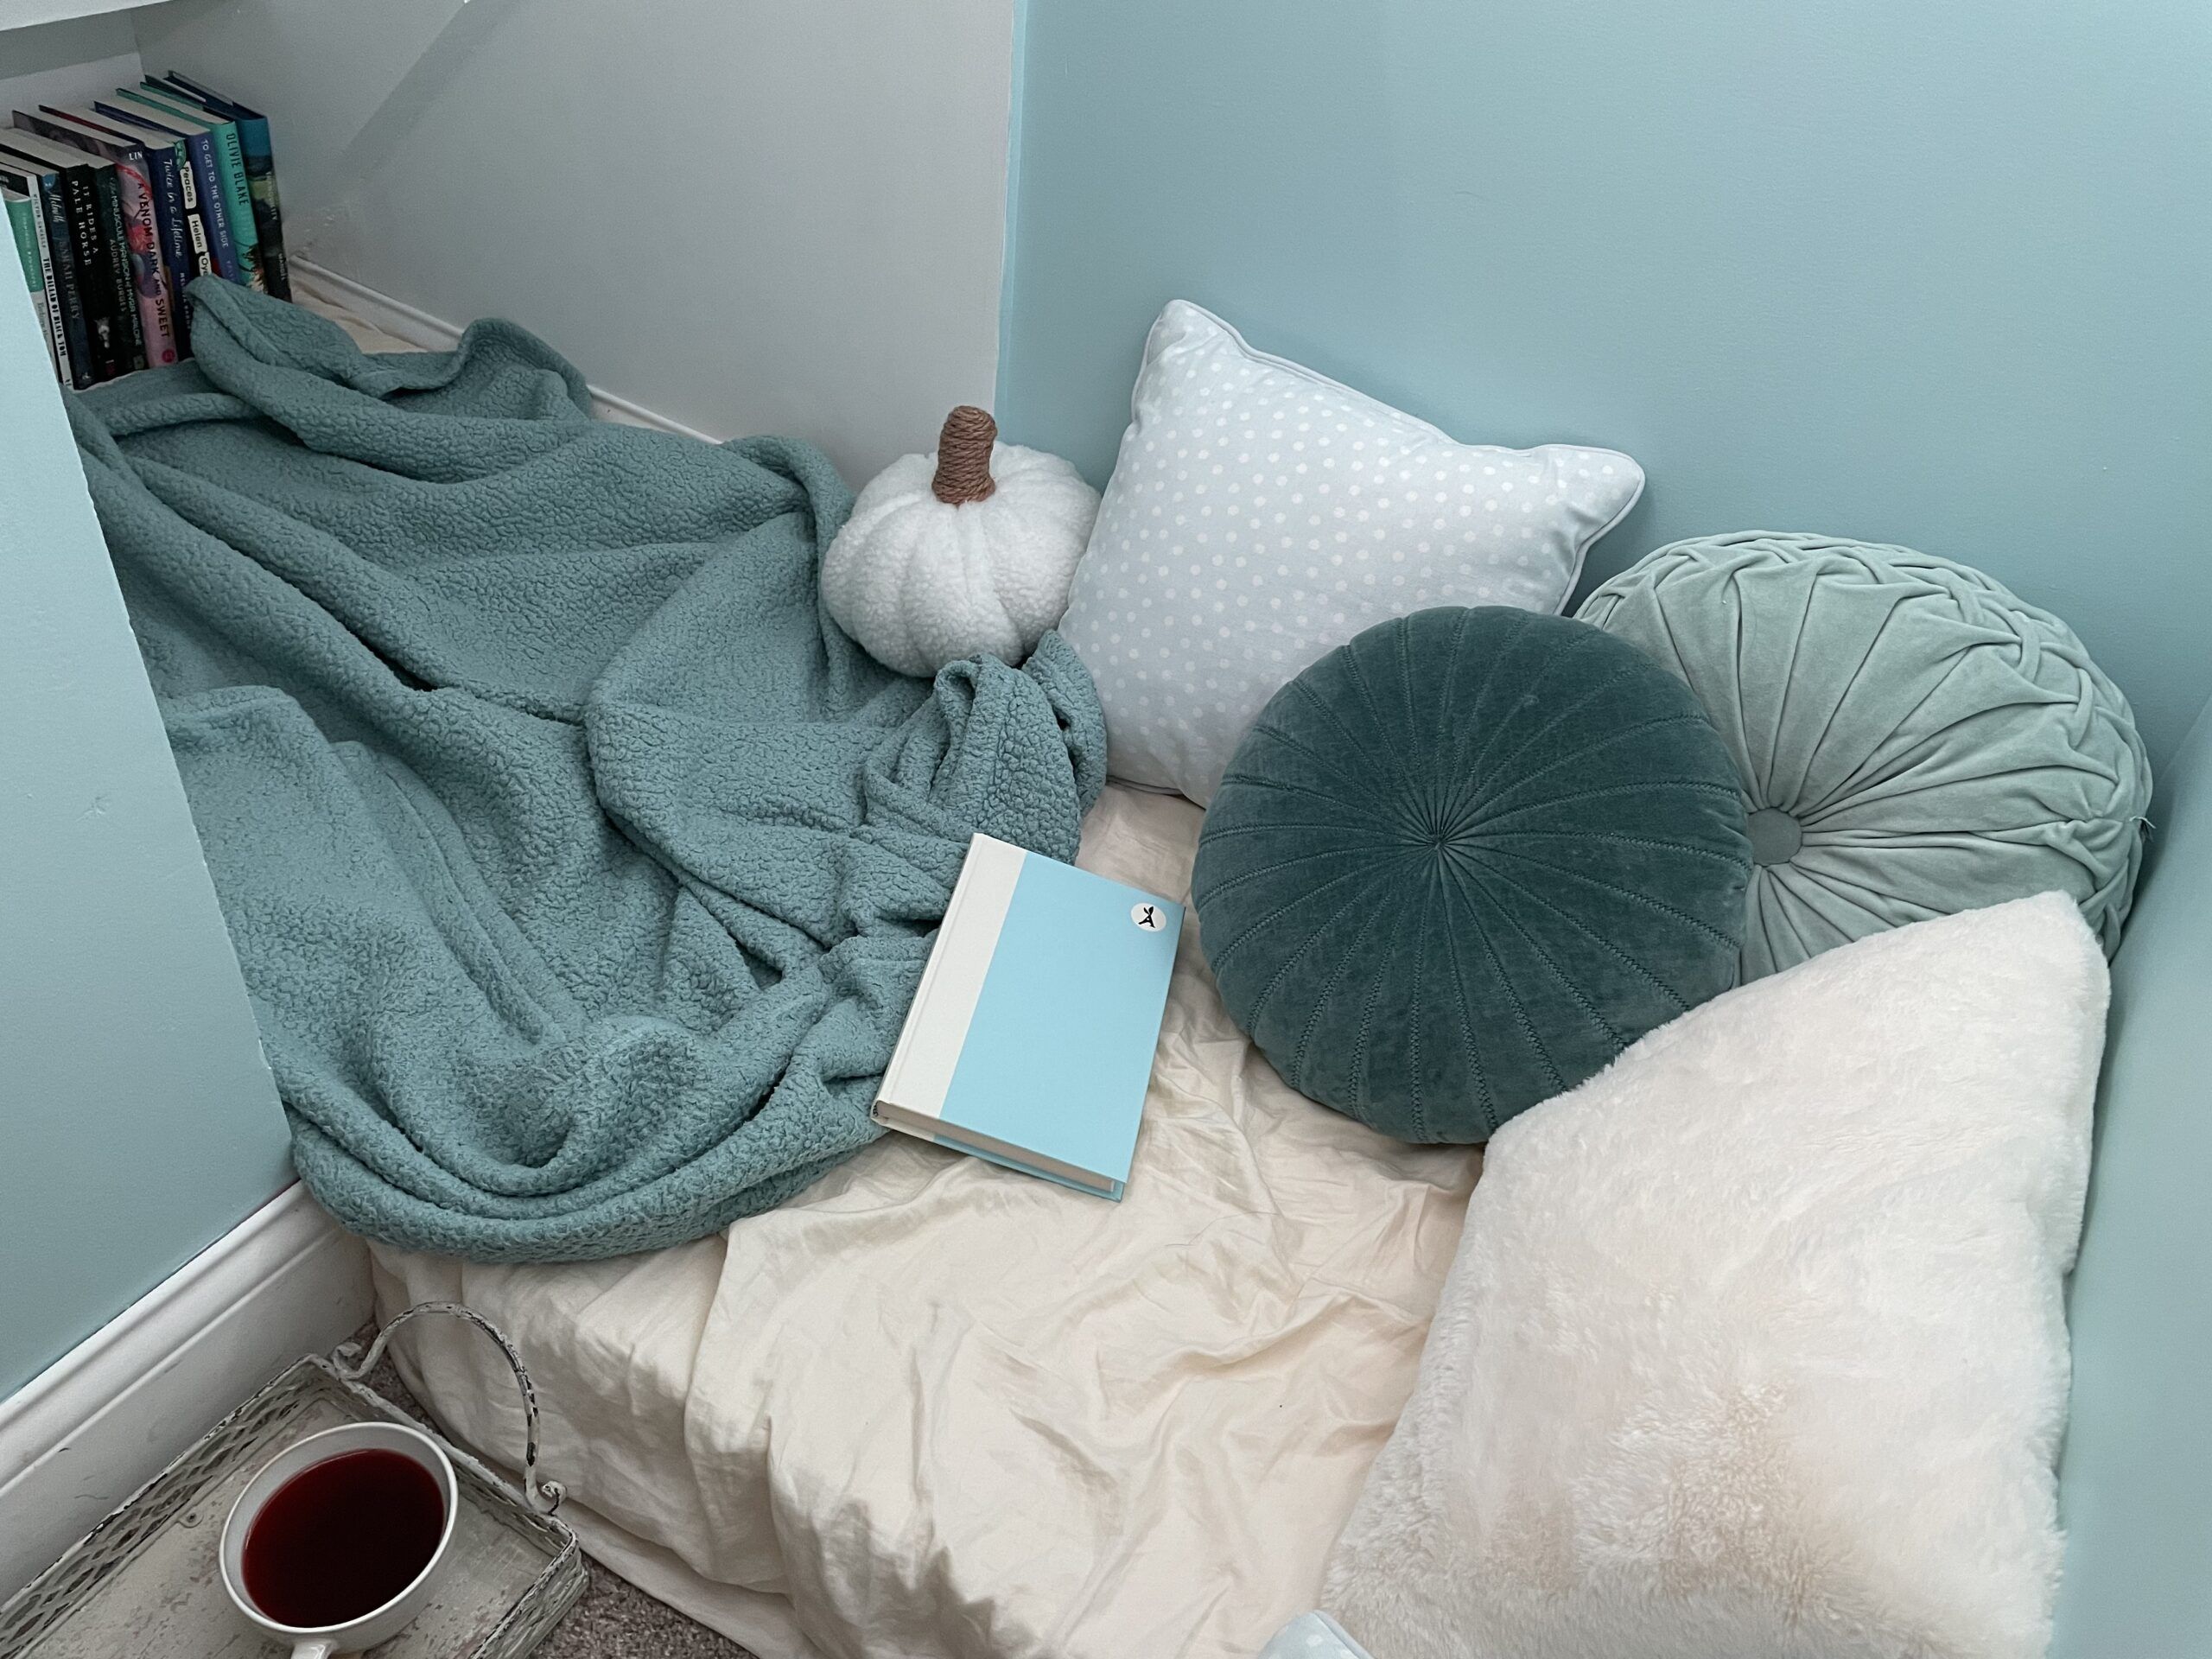 reading nook underneath with stairs with blue and white pillows, a blue blanket, a cup of tea, and books